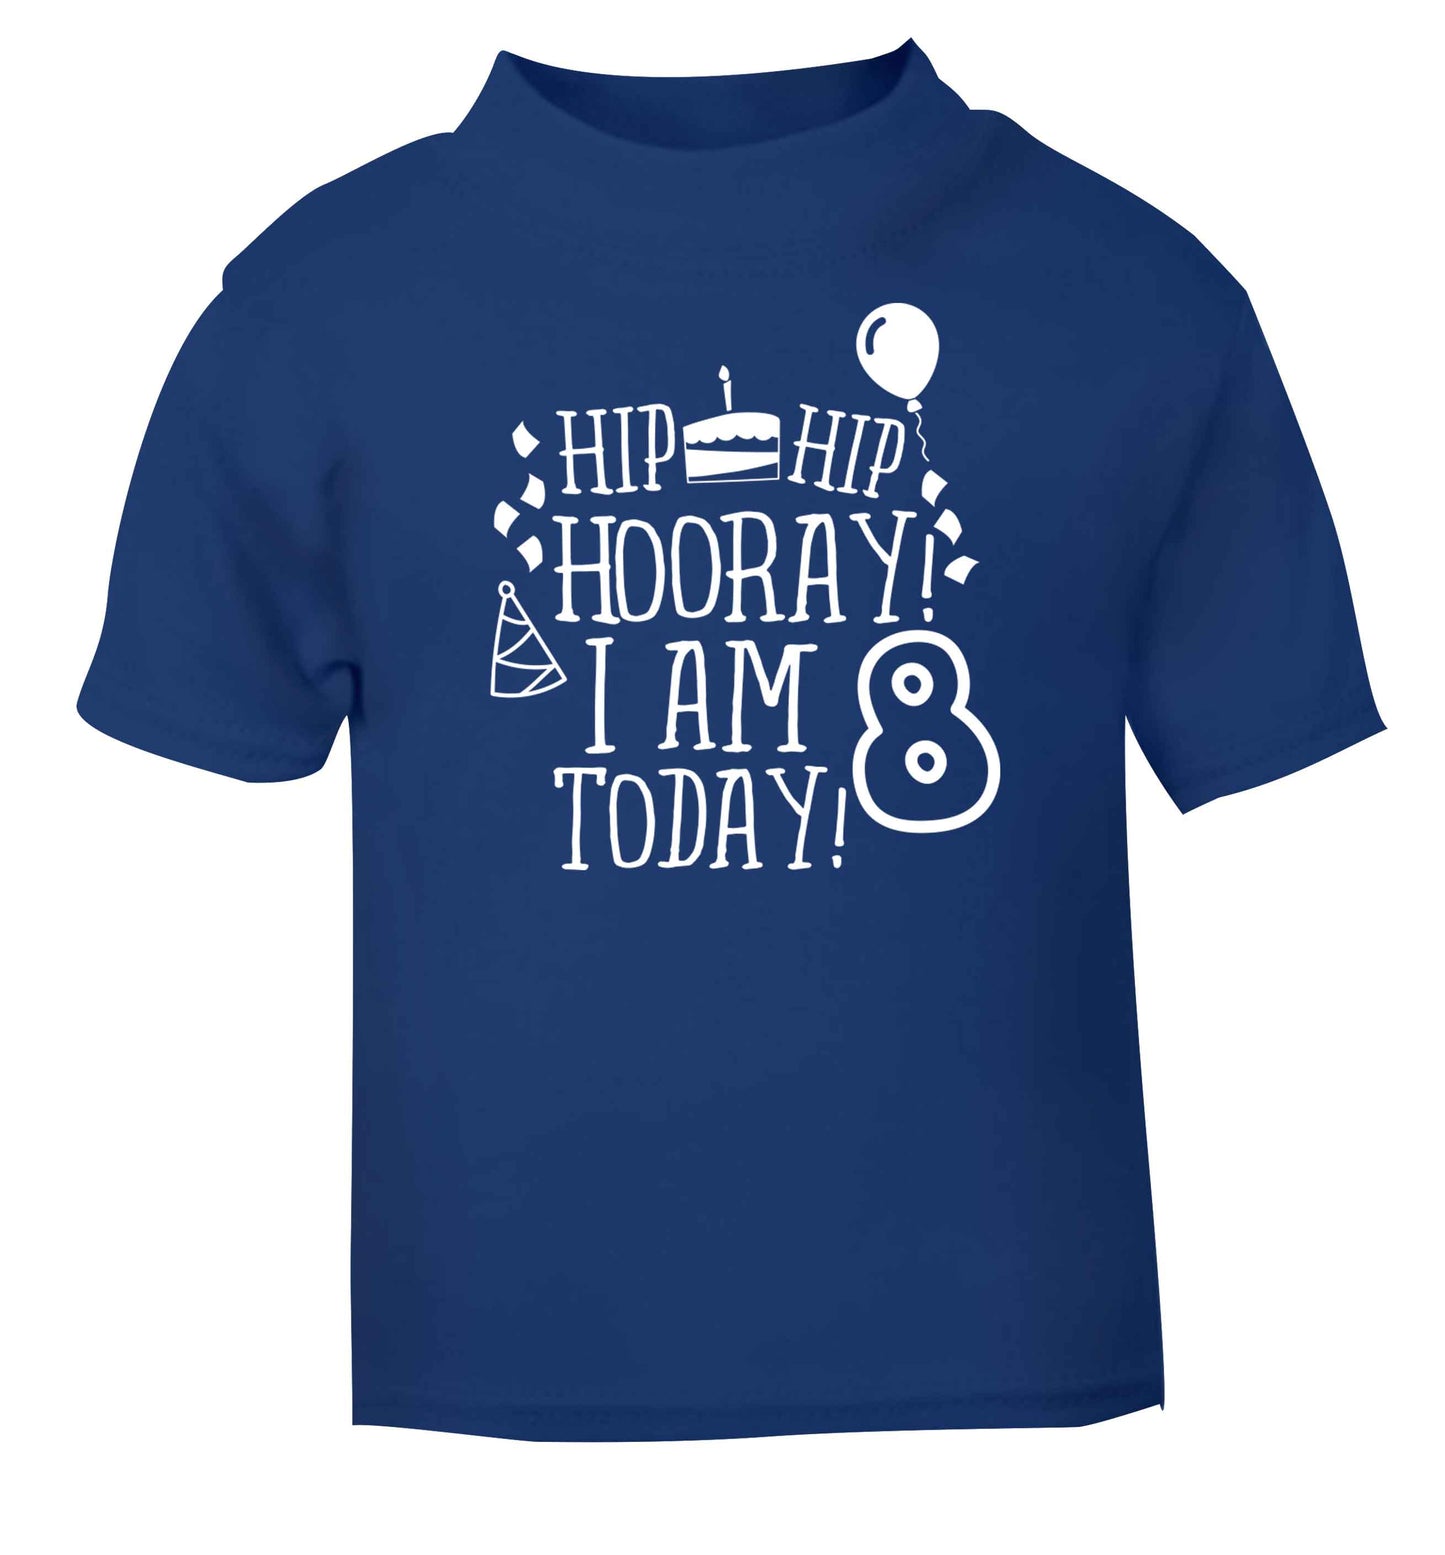 Hip hip hooray I am 8 today! blue baby toddler Tshirt 2 Years